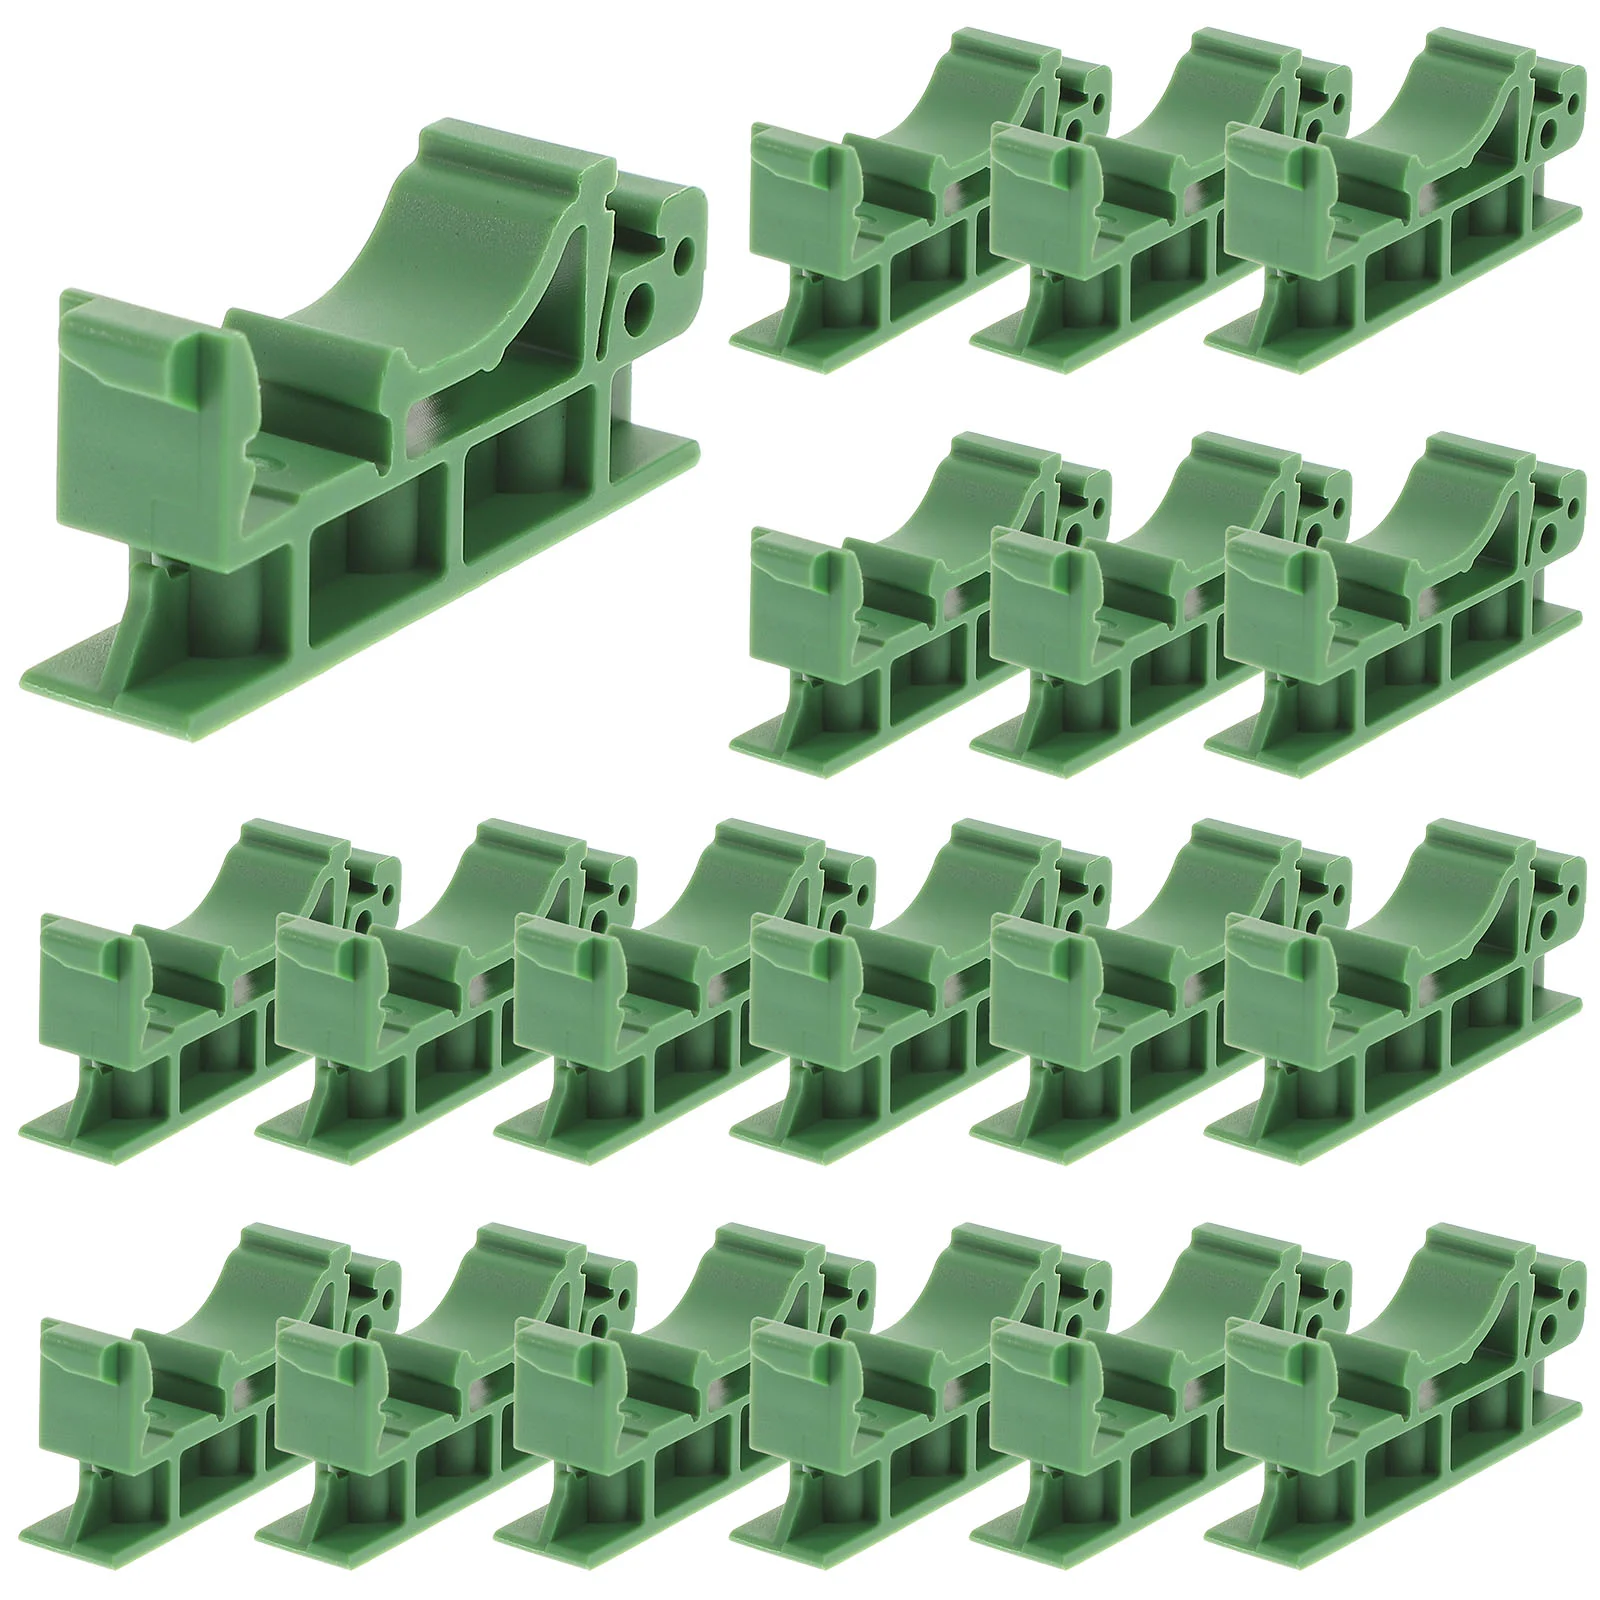 

20pcs PCB DIN Rail Mounting Adapter PCB Mount Holder Professional Rail Adapters